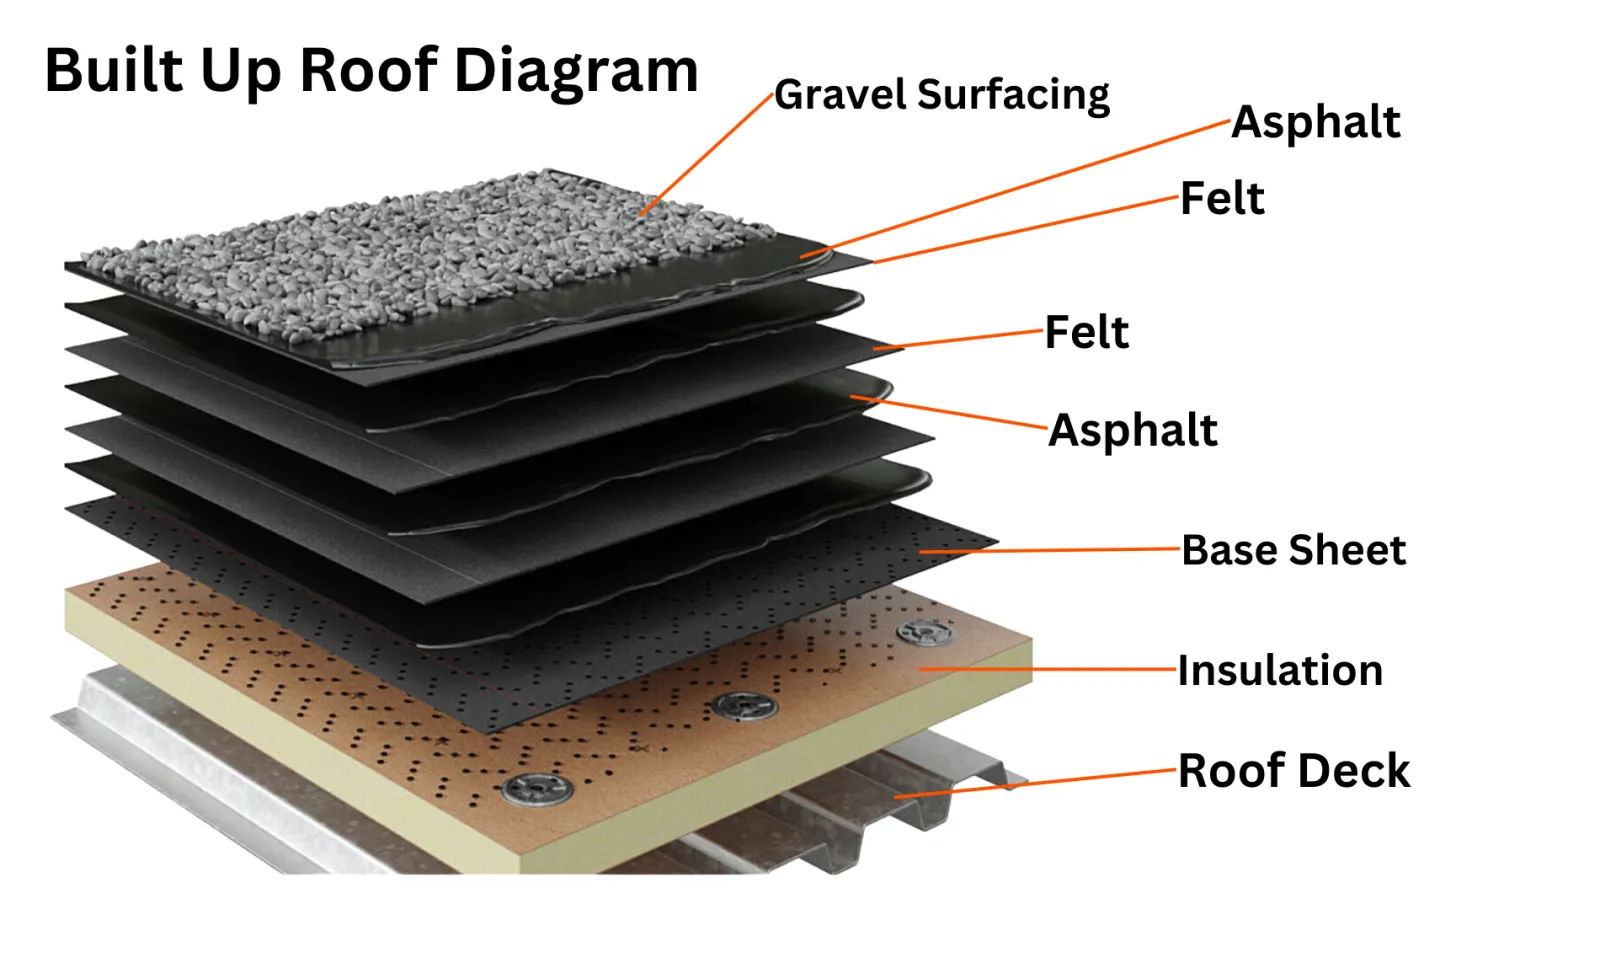 Built Up Roofing Diagram